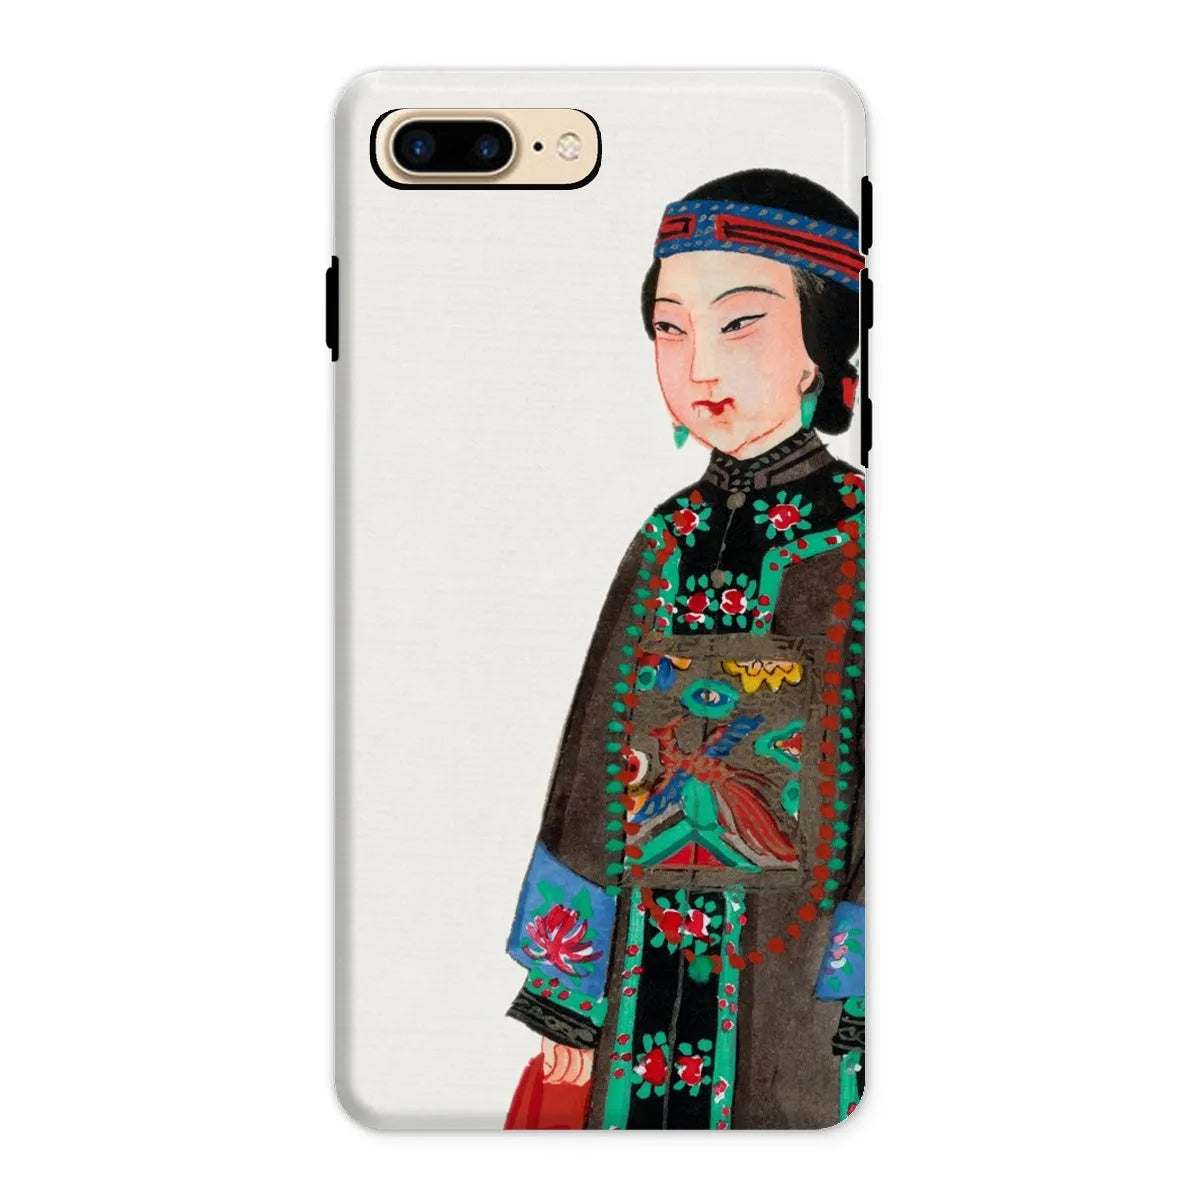 Noblewoman At Court - Chinese Aesthetic Art Phone Case - Iphone 8 Plus / Matte - Mobile Phone Cases - Aesthetic Art